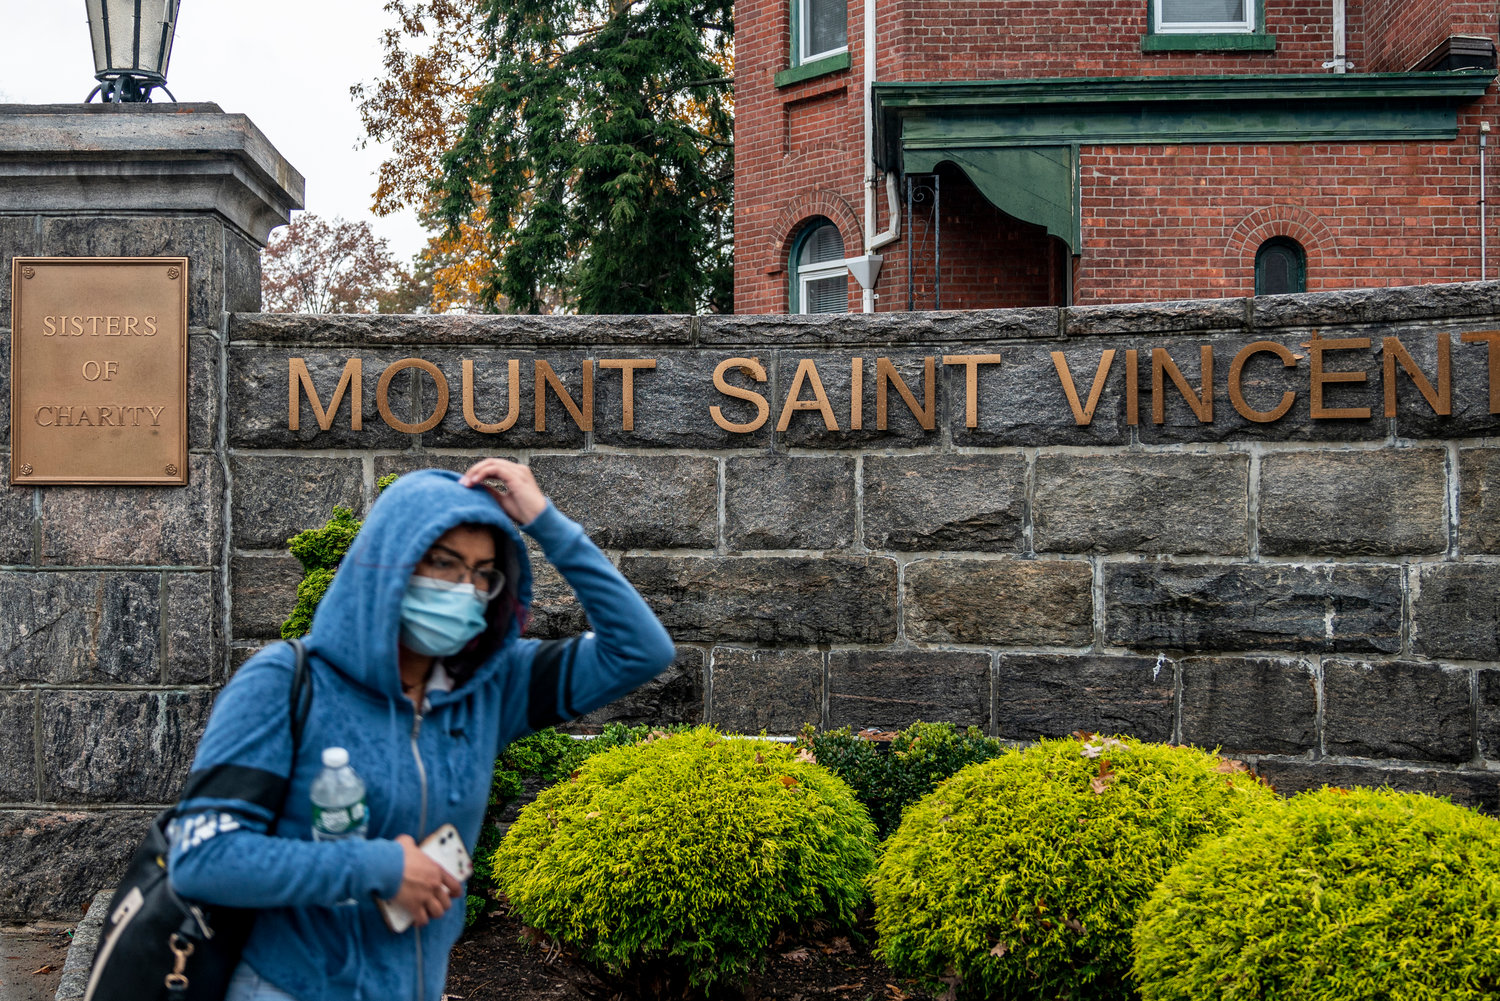 The College of Mount Saint Vincent originally planned to host some in-person classes up to and including finals week. But following guidance from Gov. Andrew Cuomo — and increased coronavirus cases on campus and across the city — The Mount moved all classes fully online beginning Nov. 16.